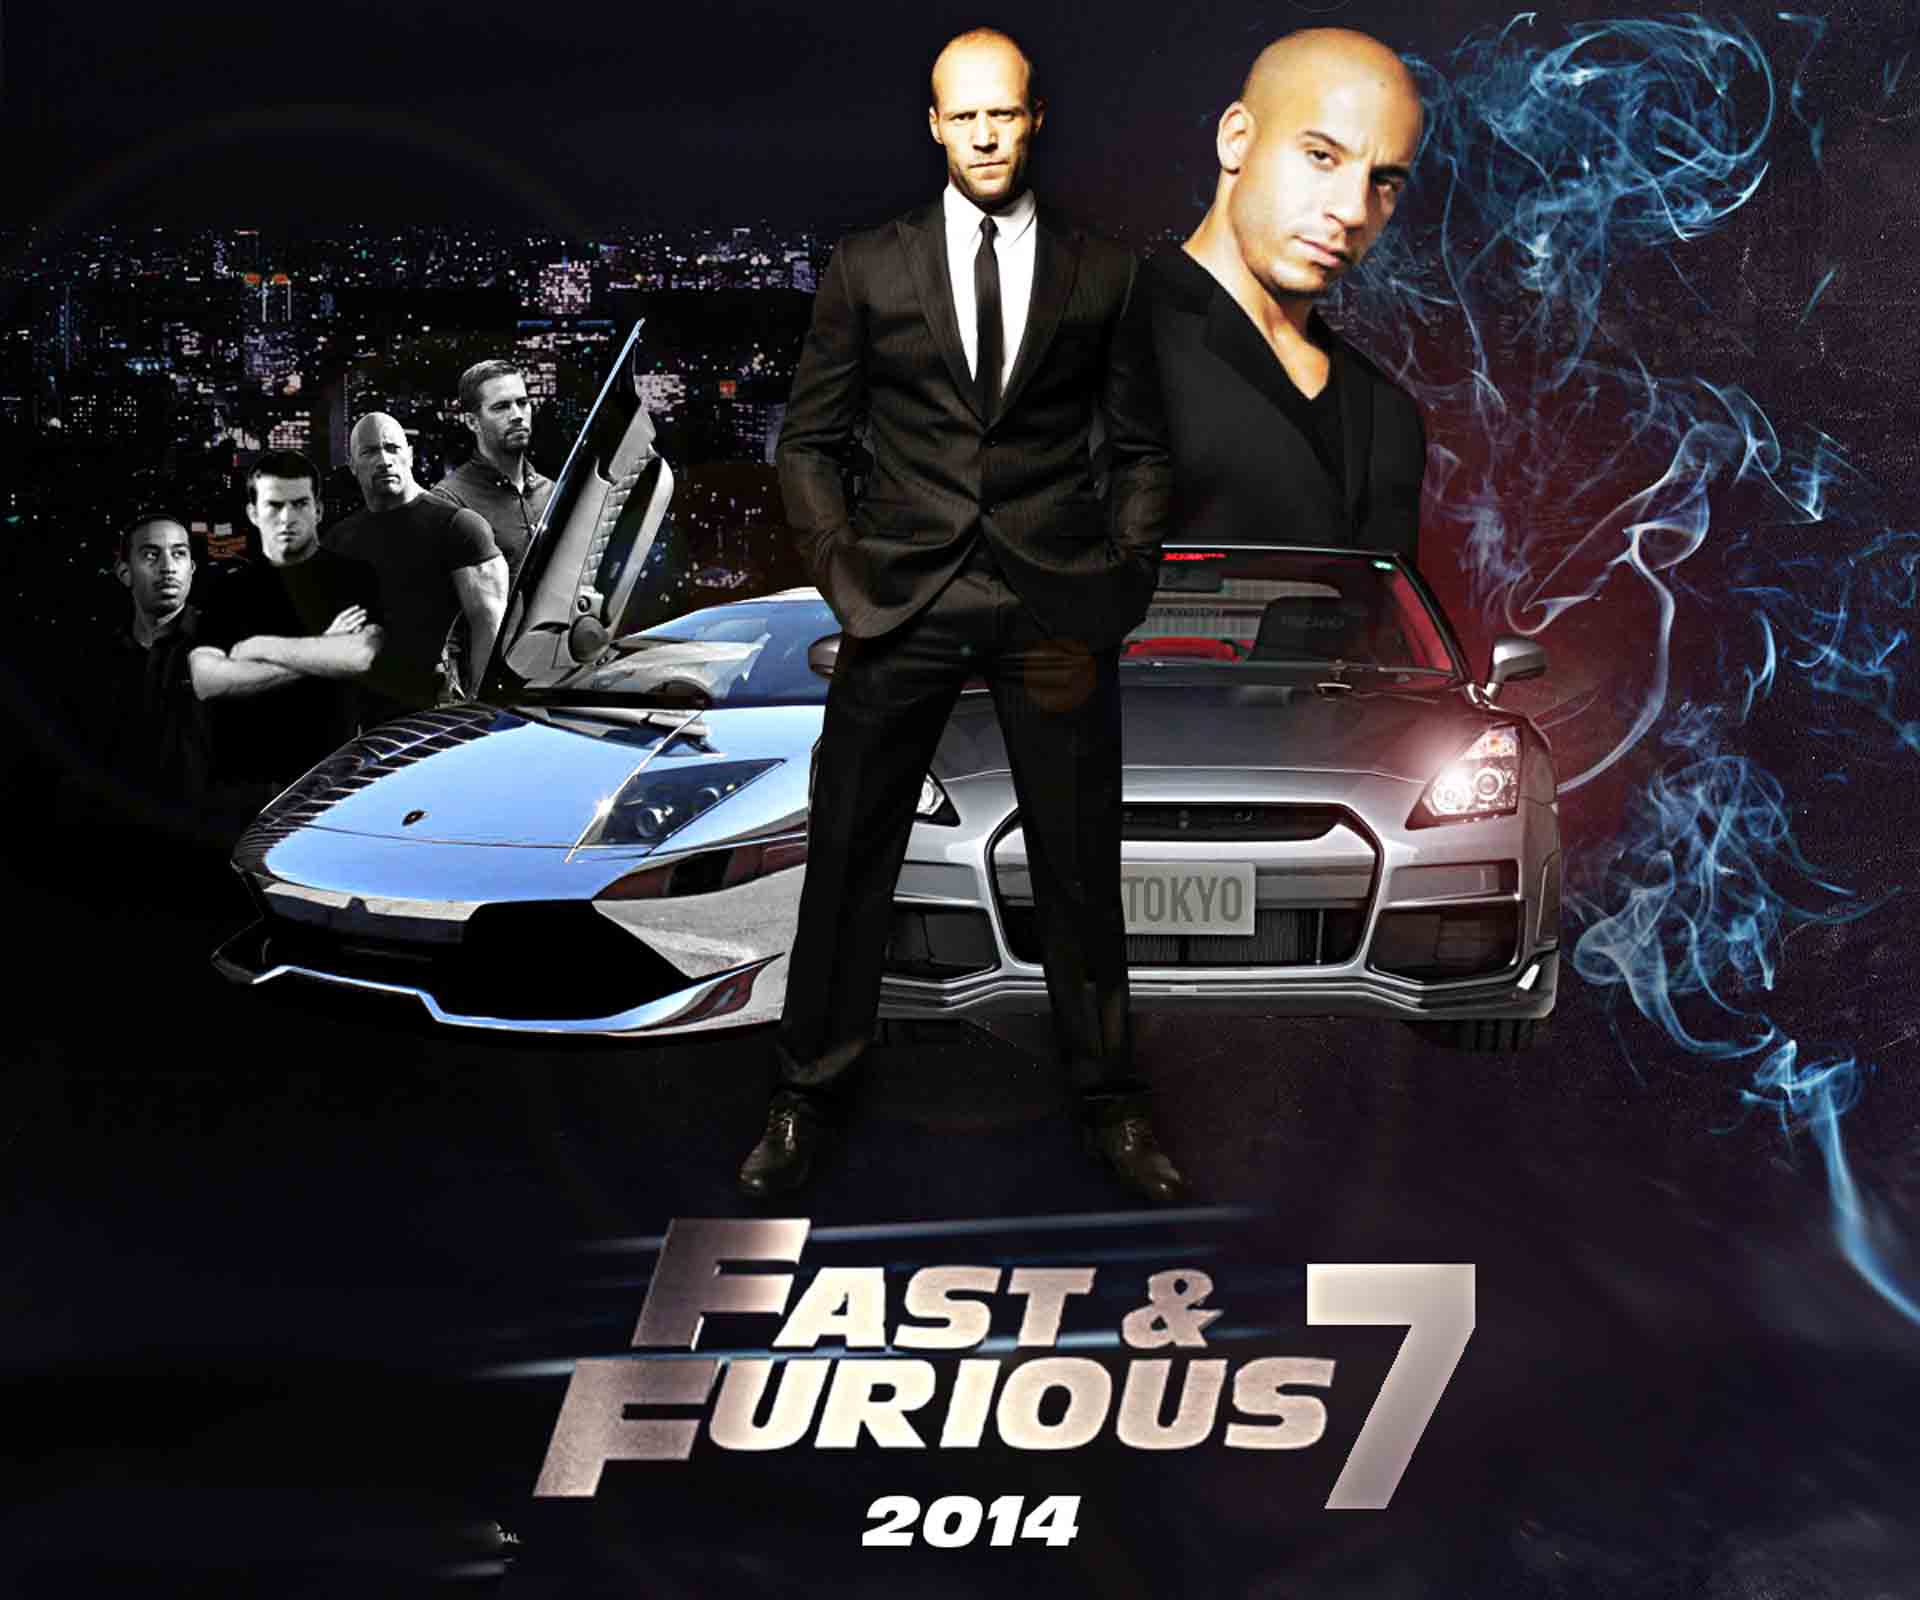 Fast and the furious 7 full movie download for mobile phone